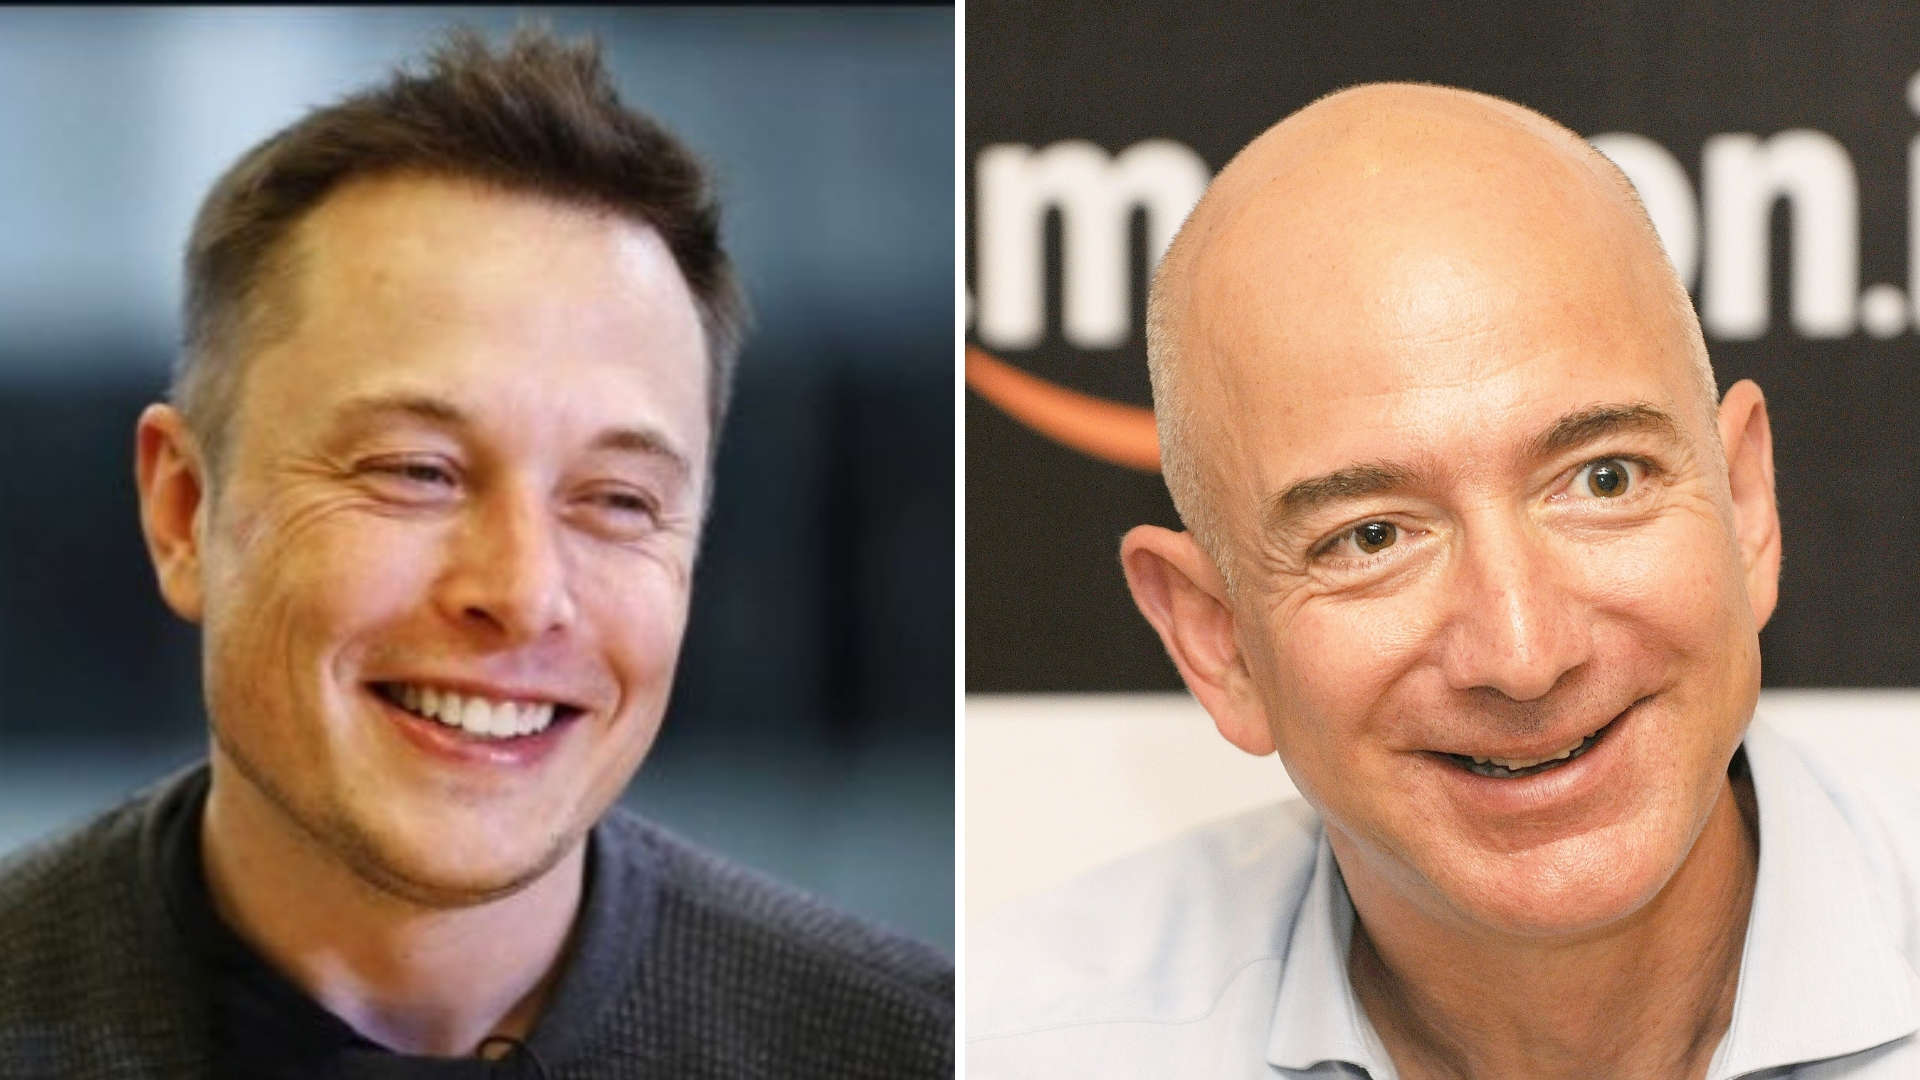 Jeff bezos and elon musk have more common than just beg billionaires busess sider dia